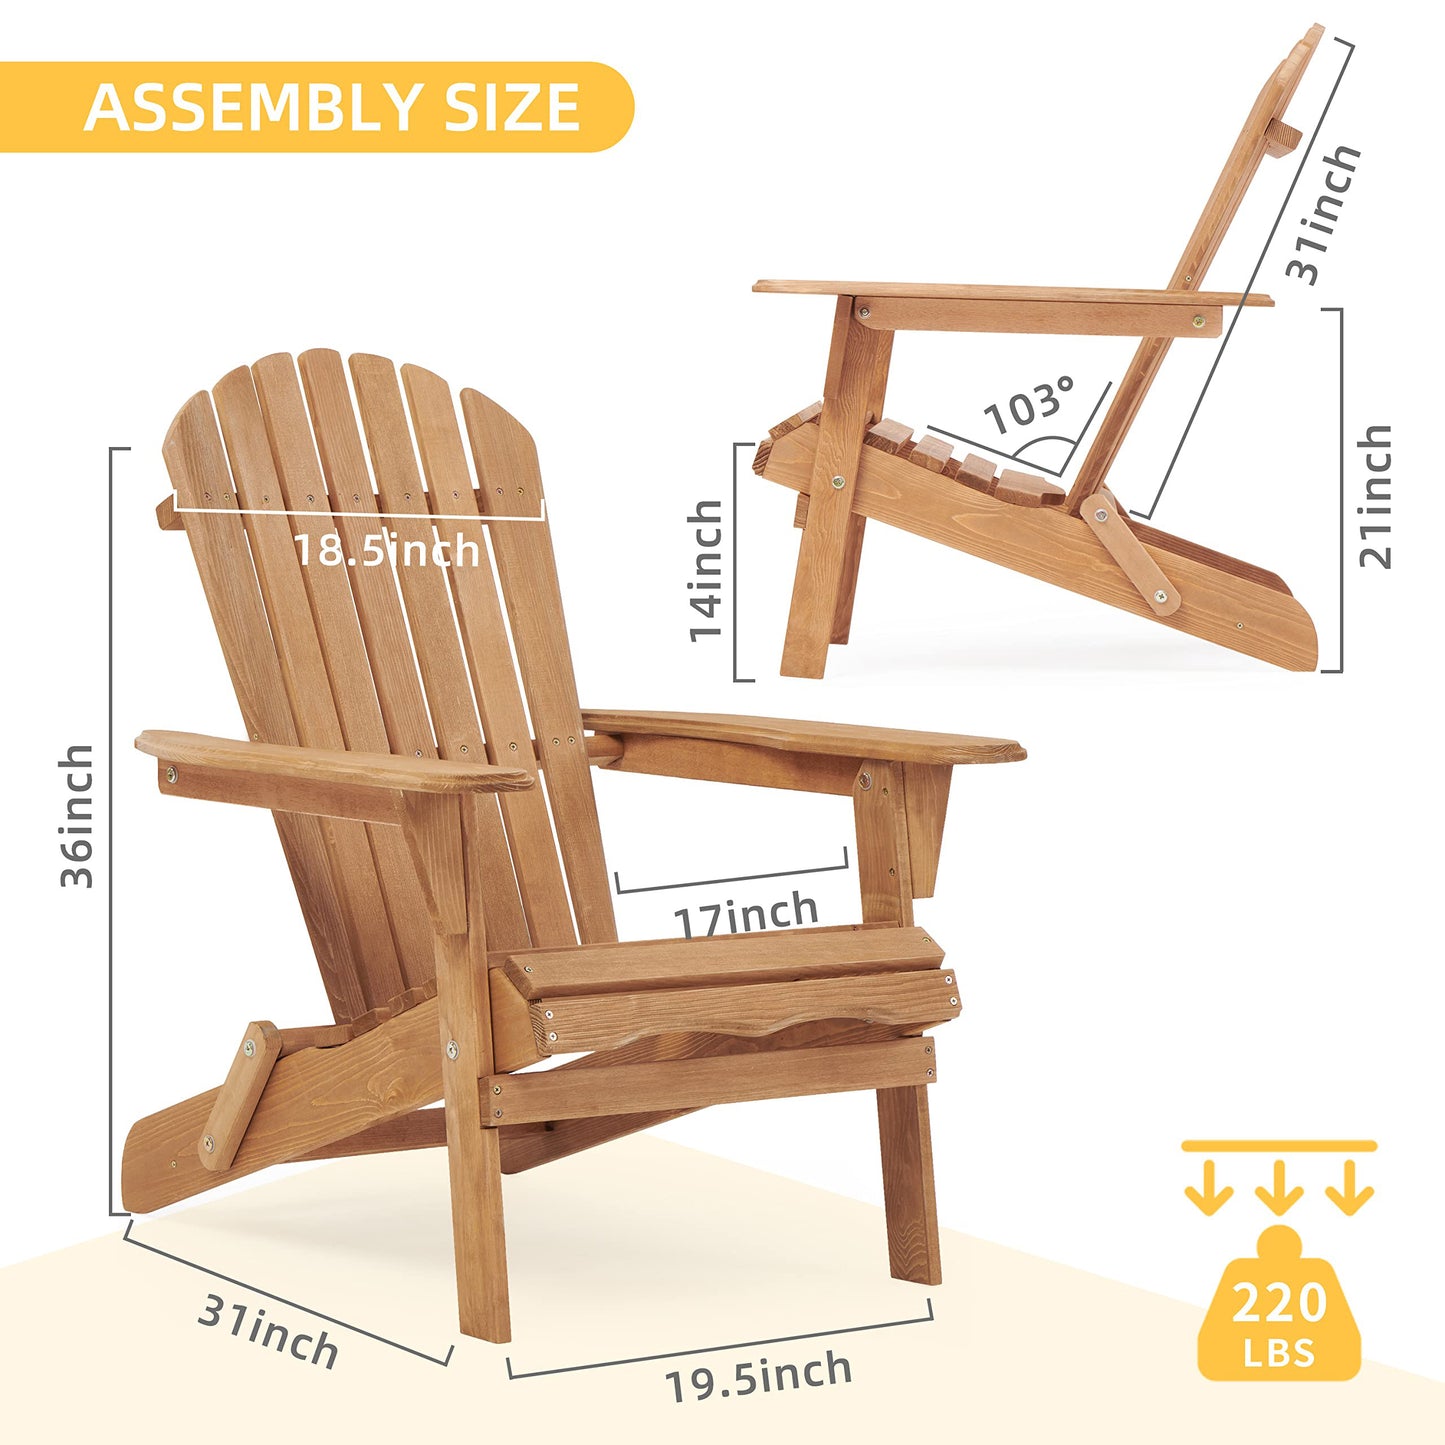 Wooden Outdoor Folding Adirondack Chair Set of 2 Wood Lounge Patio Chair for Garden,Garden, Lawn, Backyard, Deck, Pool Side, Fire Pit,Half Assembled,